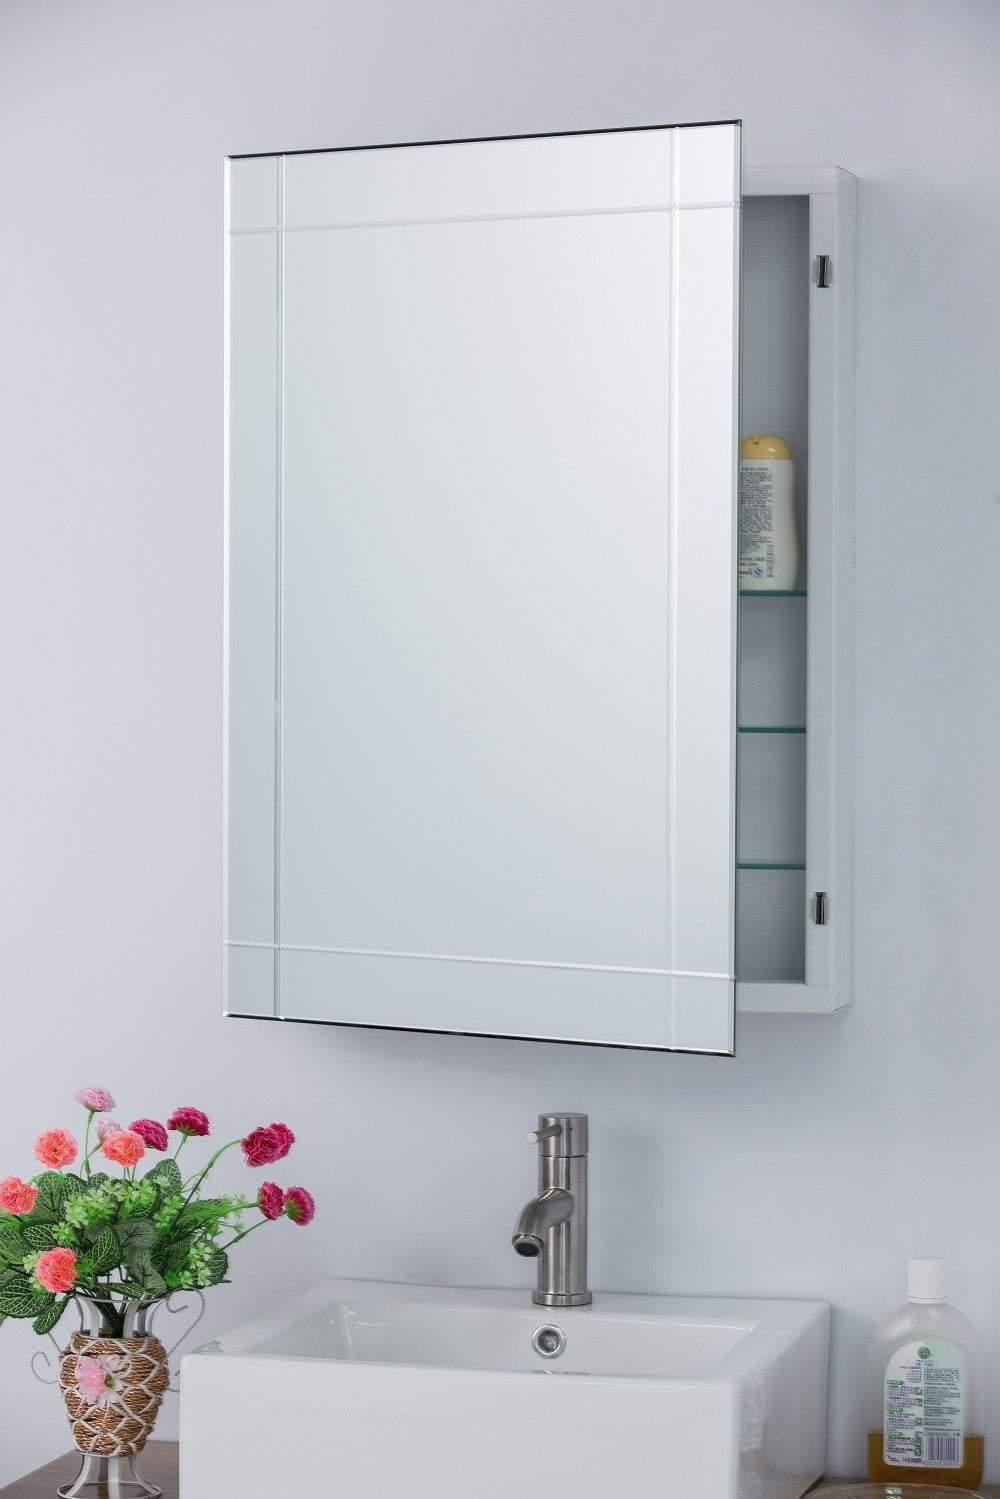 22.25"W x 30.25"H Medicine Cabinet, Mirrored Frame, Recessed or Surface Mount